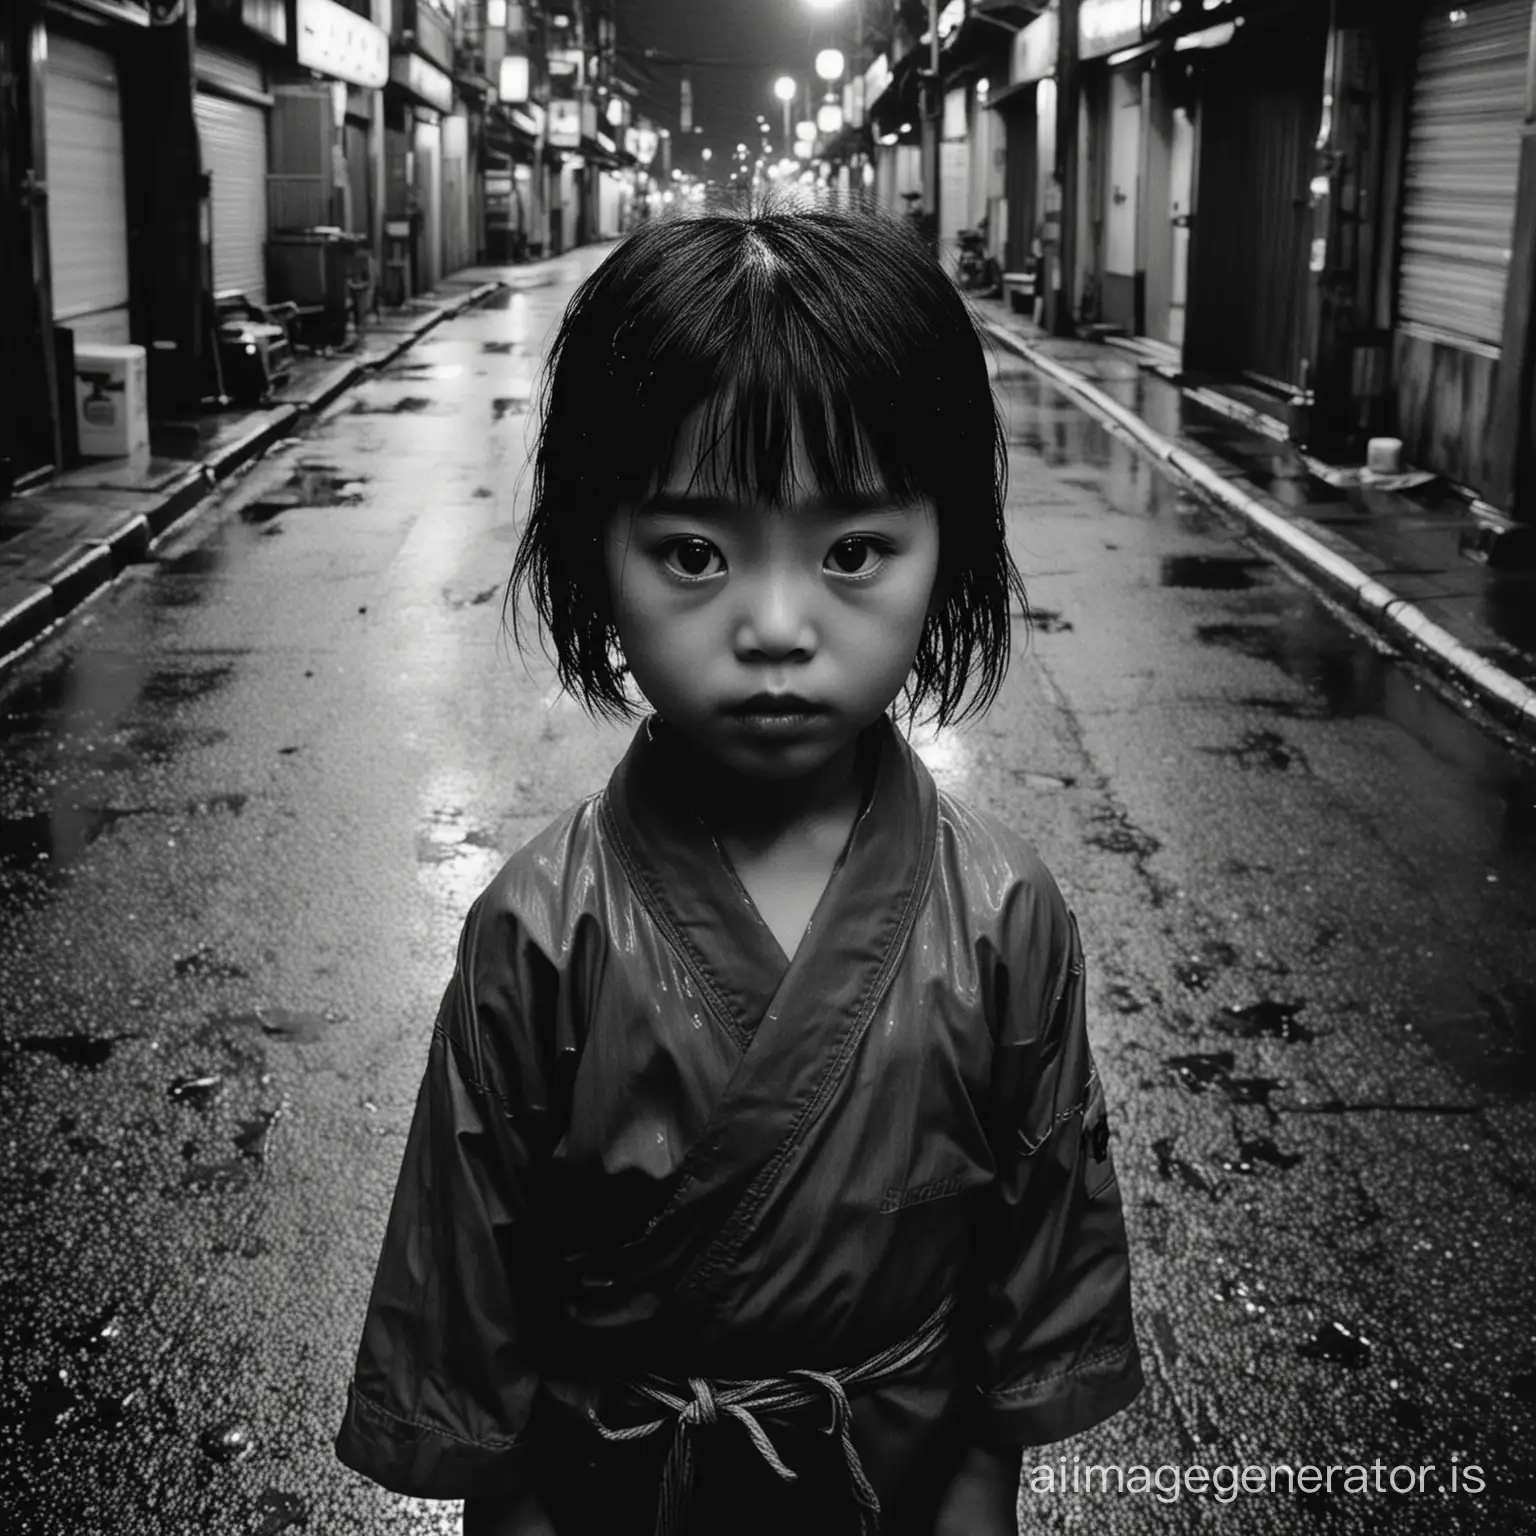 Generate an AI-generated image capturing the poignant essence of Japanese photographer Daido Moriyama's style, focusing on a portrait of a melancholic Japanese child amidst the gloomy ambiance of a rainy day in a quiet Tokyo alley. Infuse the scene with Moriyama's signature gritty aesthetic, emphasizing low light, deep shadows, and a sense of solitude. Highlight the child's somber expression and the atmospheric mood of the rain-soaked urban setting to evoke the emotional depth characteristic of Moriyama's powerful imagery.